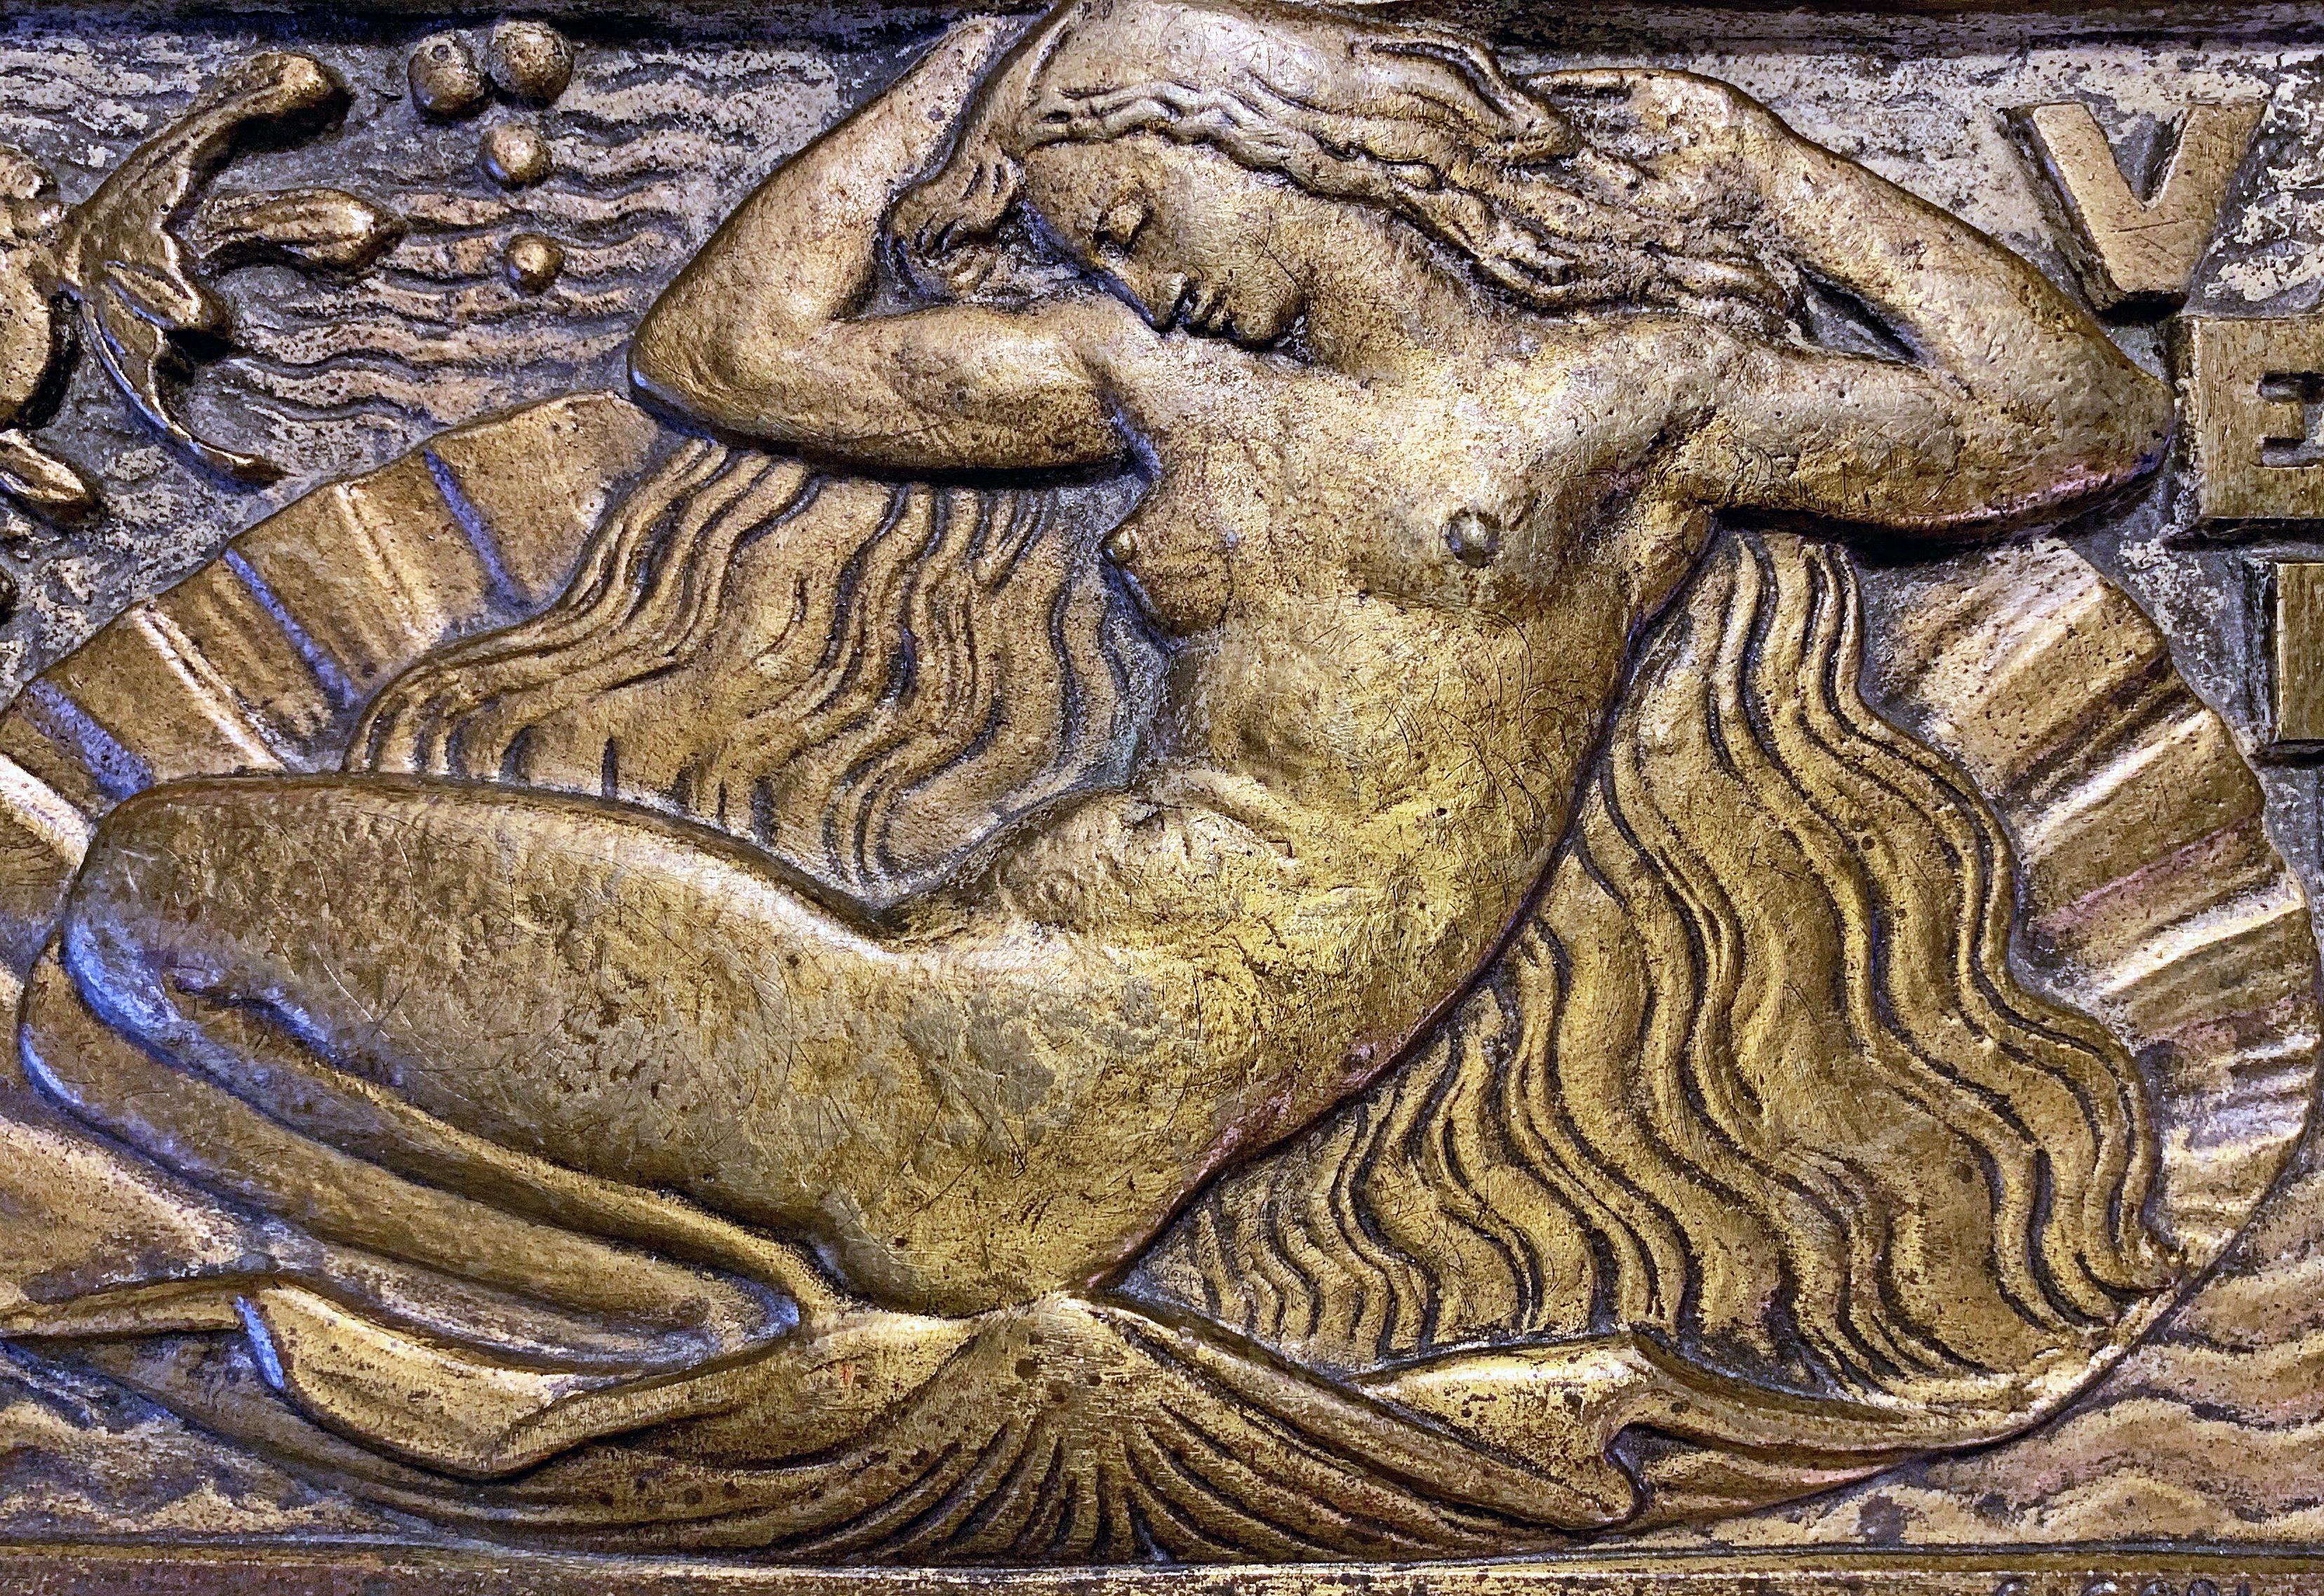 Dramatically depicted in deep relief, this scene of Venus illustrates one of the classic stories of Greek mythology, that the goddess was born out of sea foam, and afterwards came ashore on a shell, pushed along by the breath of Zephyrus, the god of